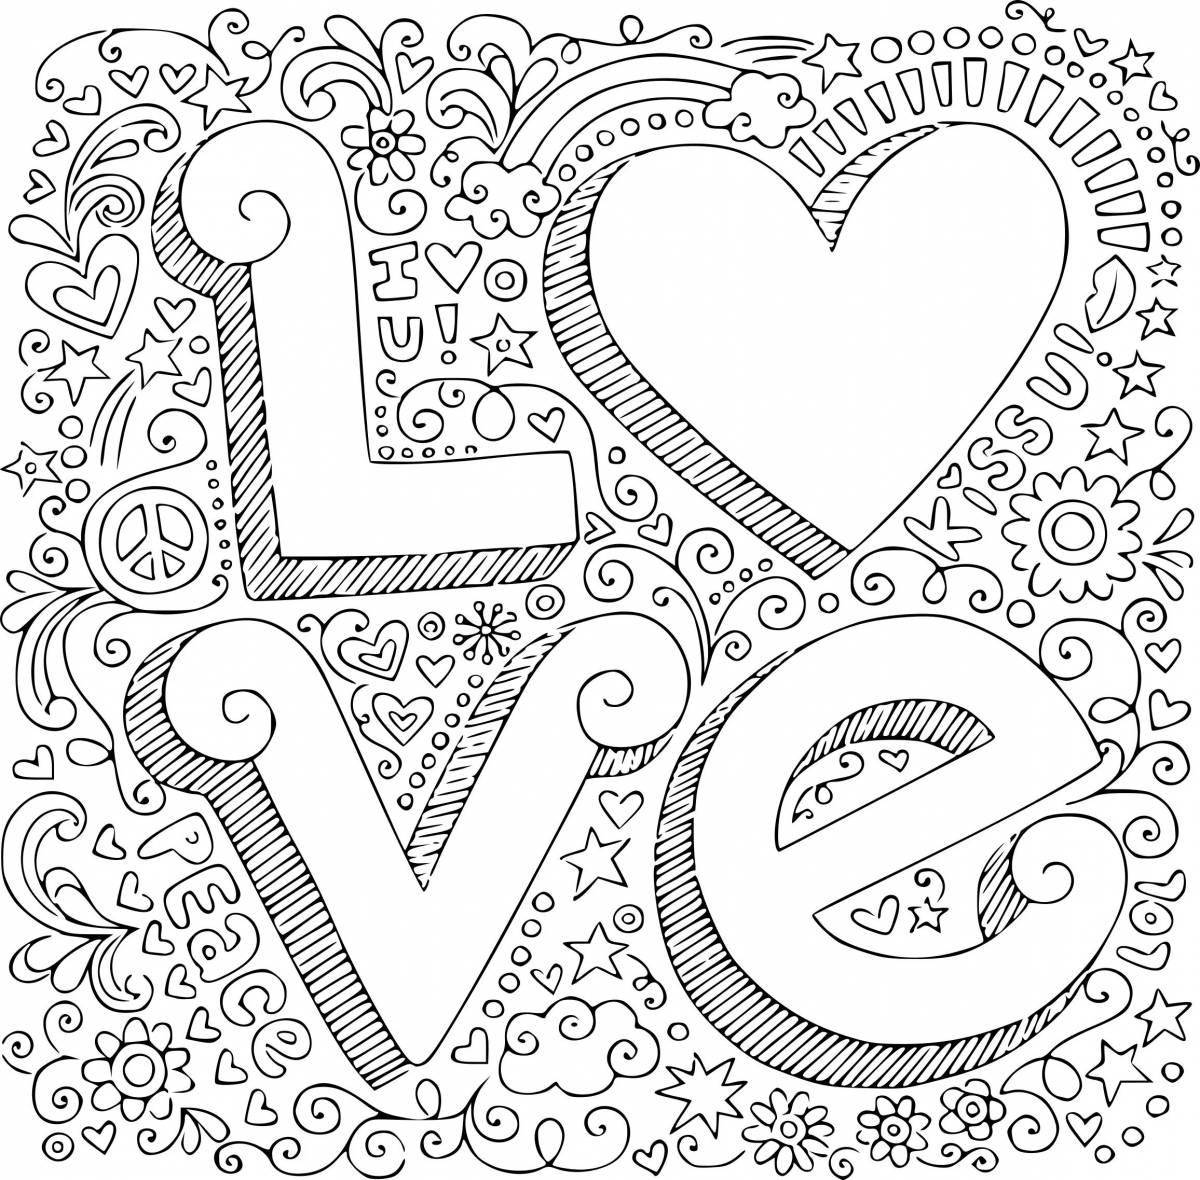 Glowing love coloring book